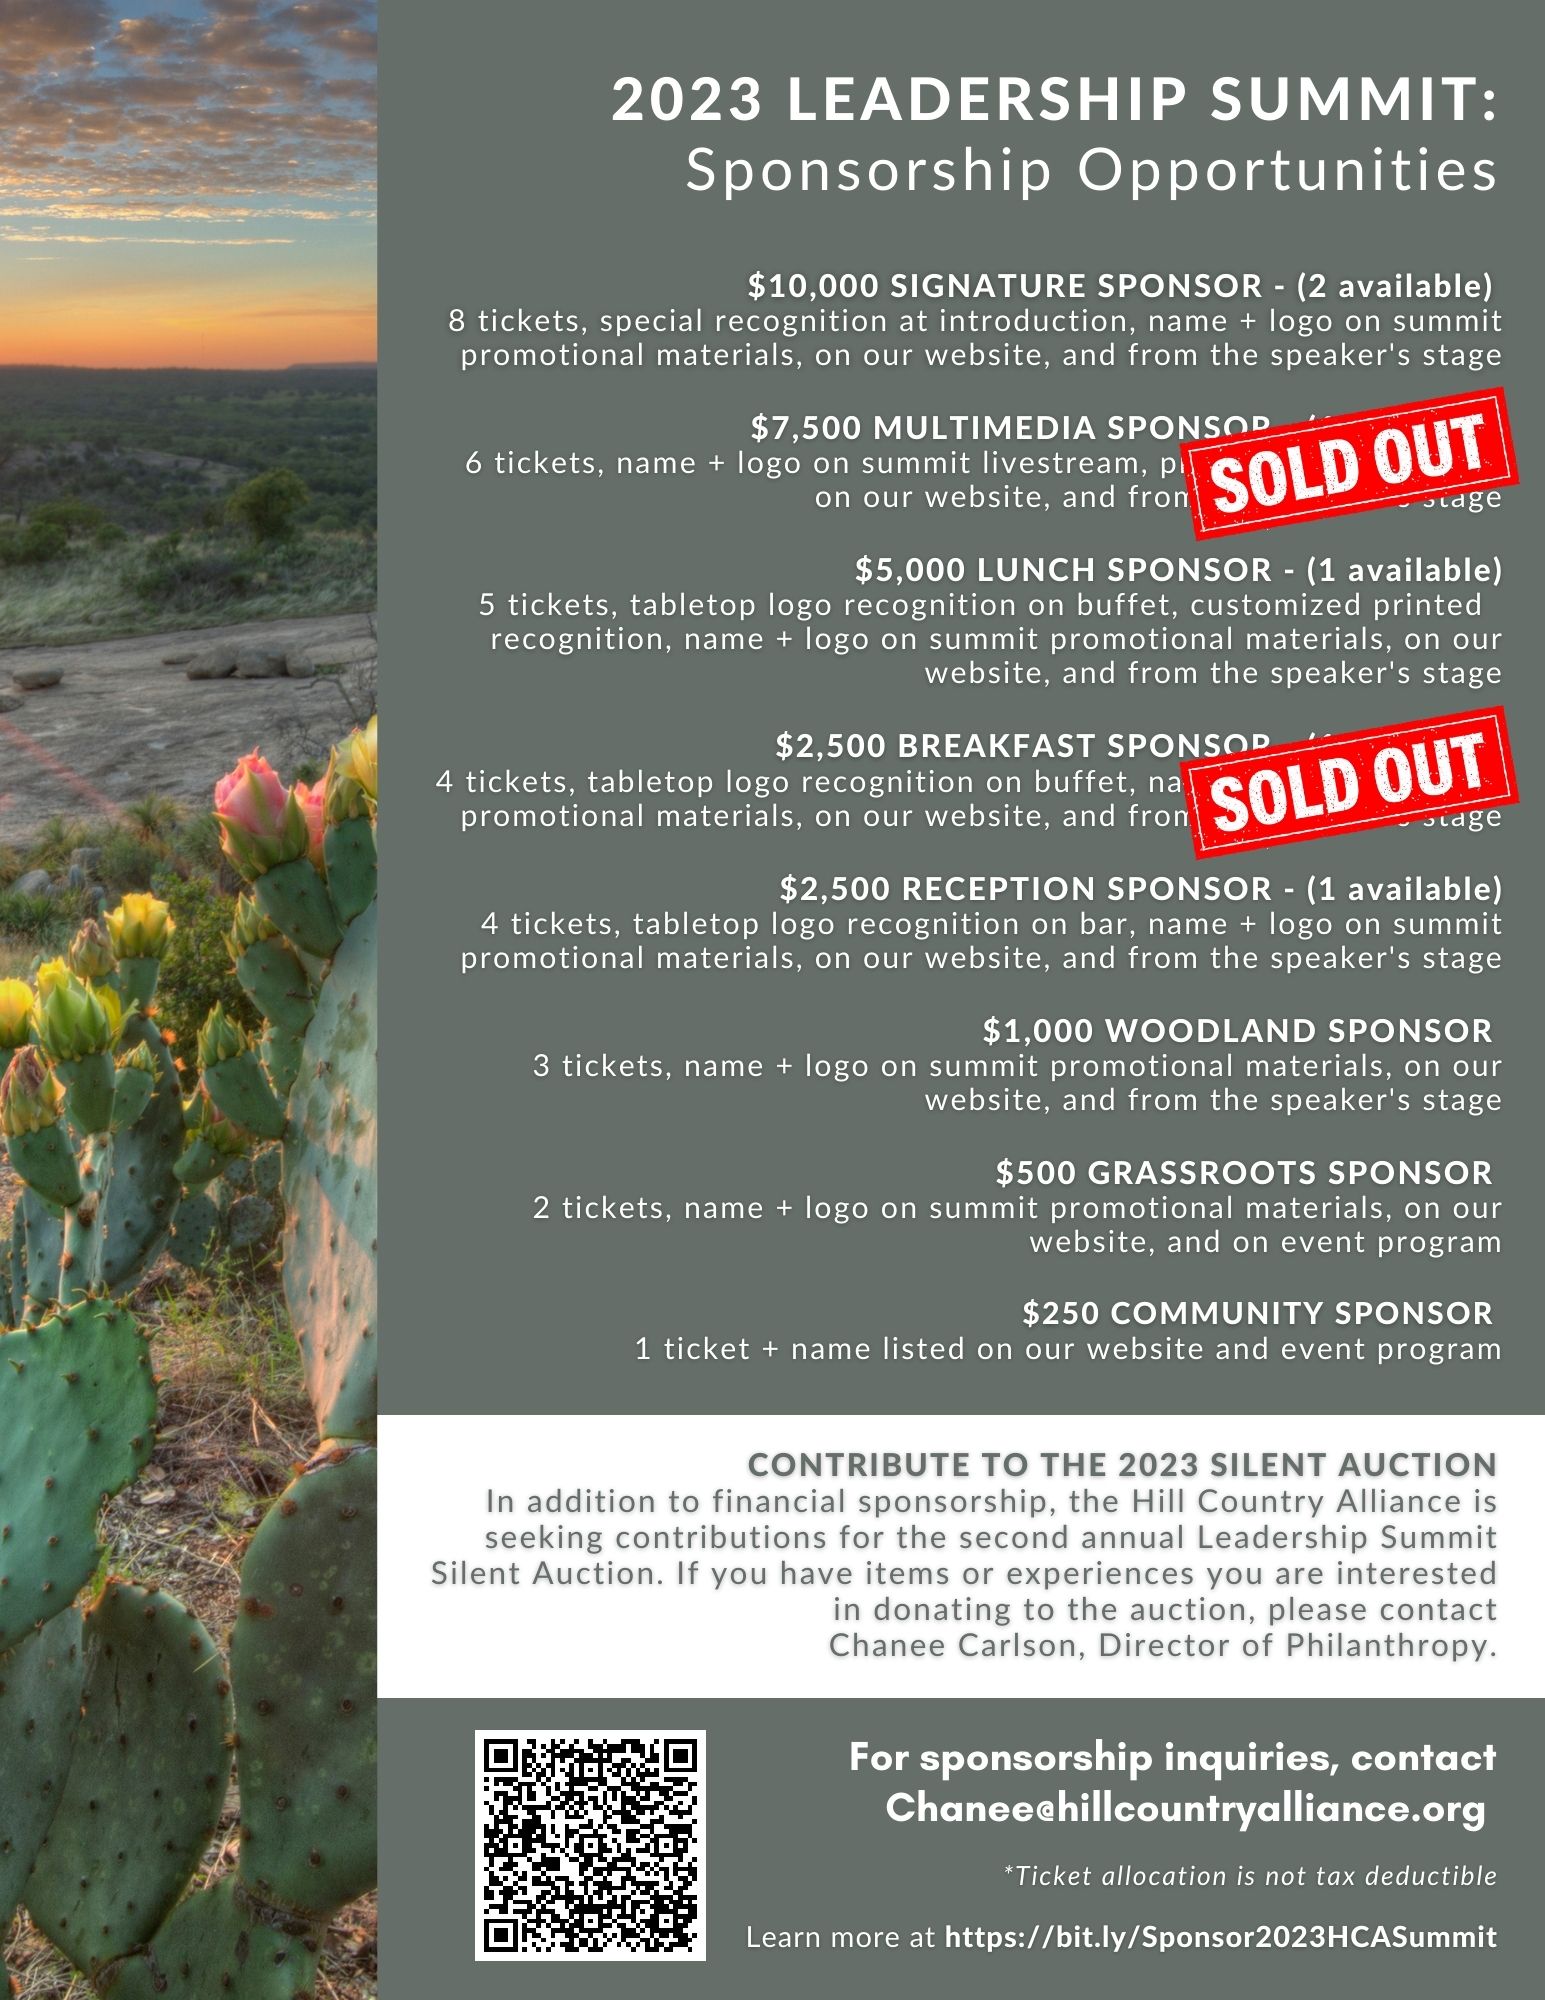 Back cover of 2022 Hill Country Leadership Summit Sponsorship Packet - click to read PDF outlining sponsorship levels. $2000 Reception and $2500 Lunch Sponsor level is sold out - other opportunities exist.